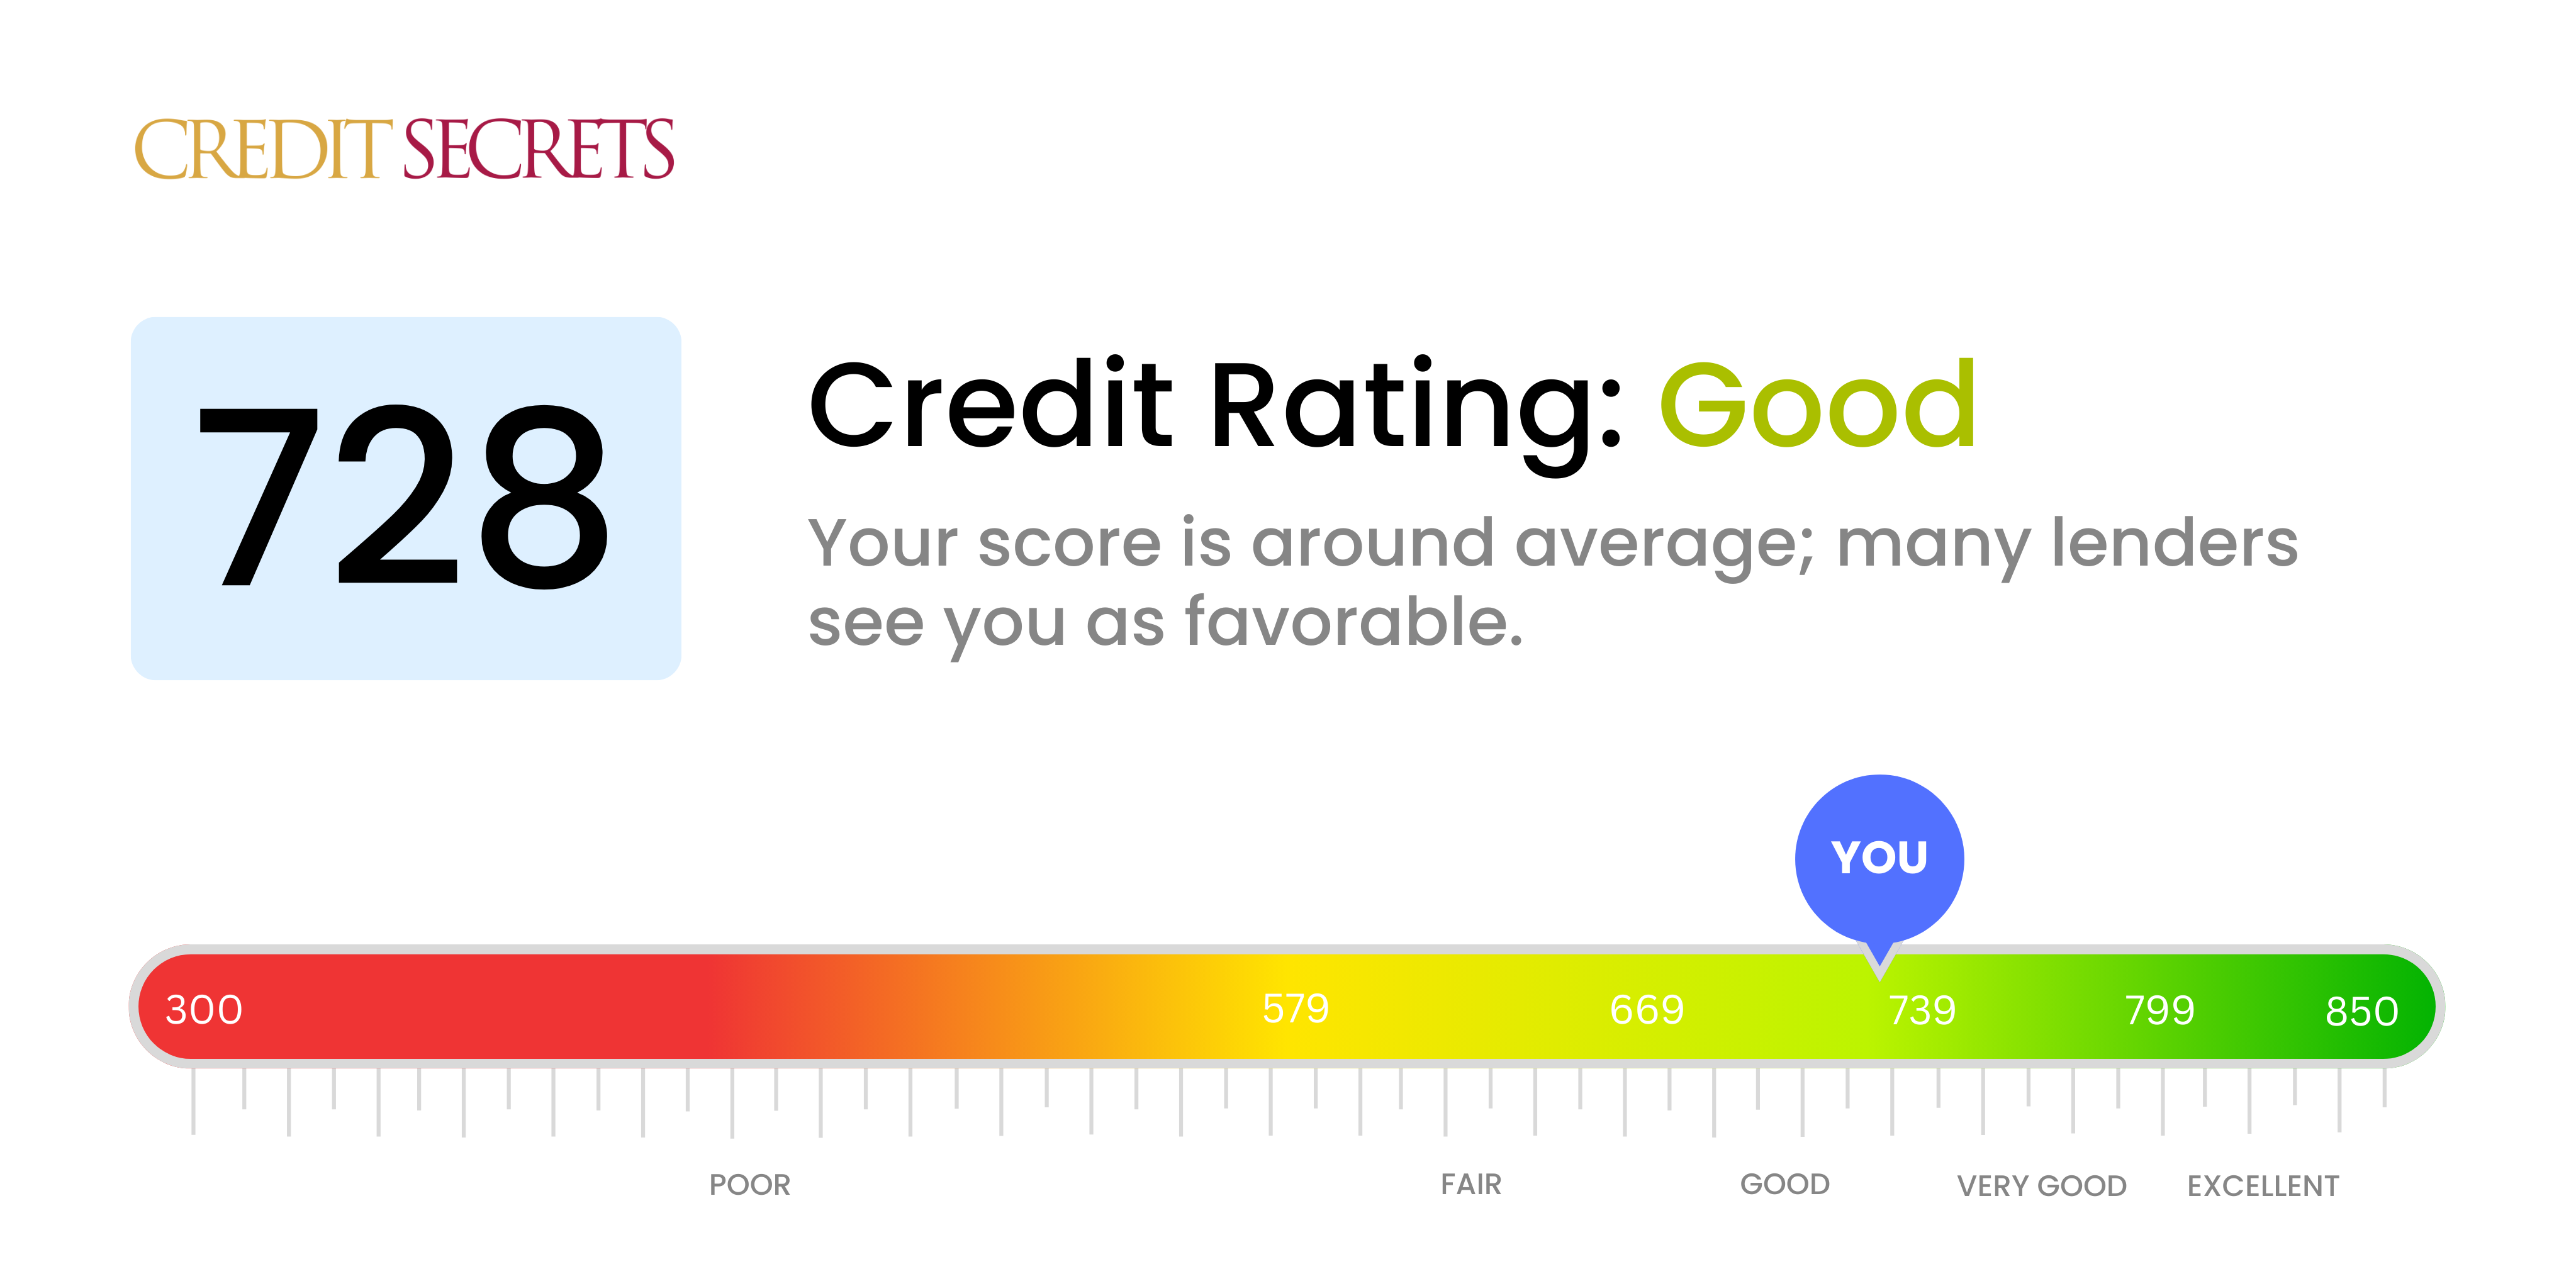 Is 728 a good credit score?